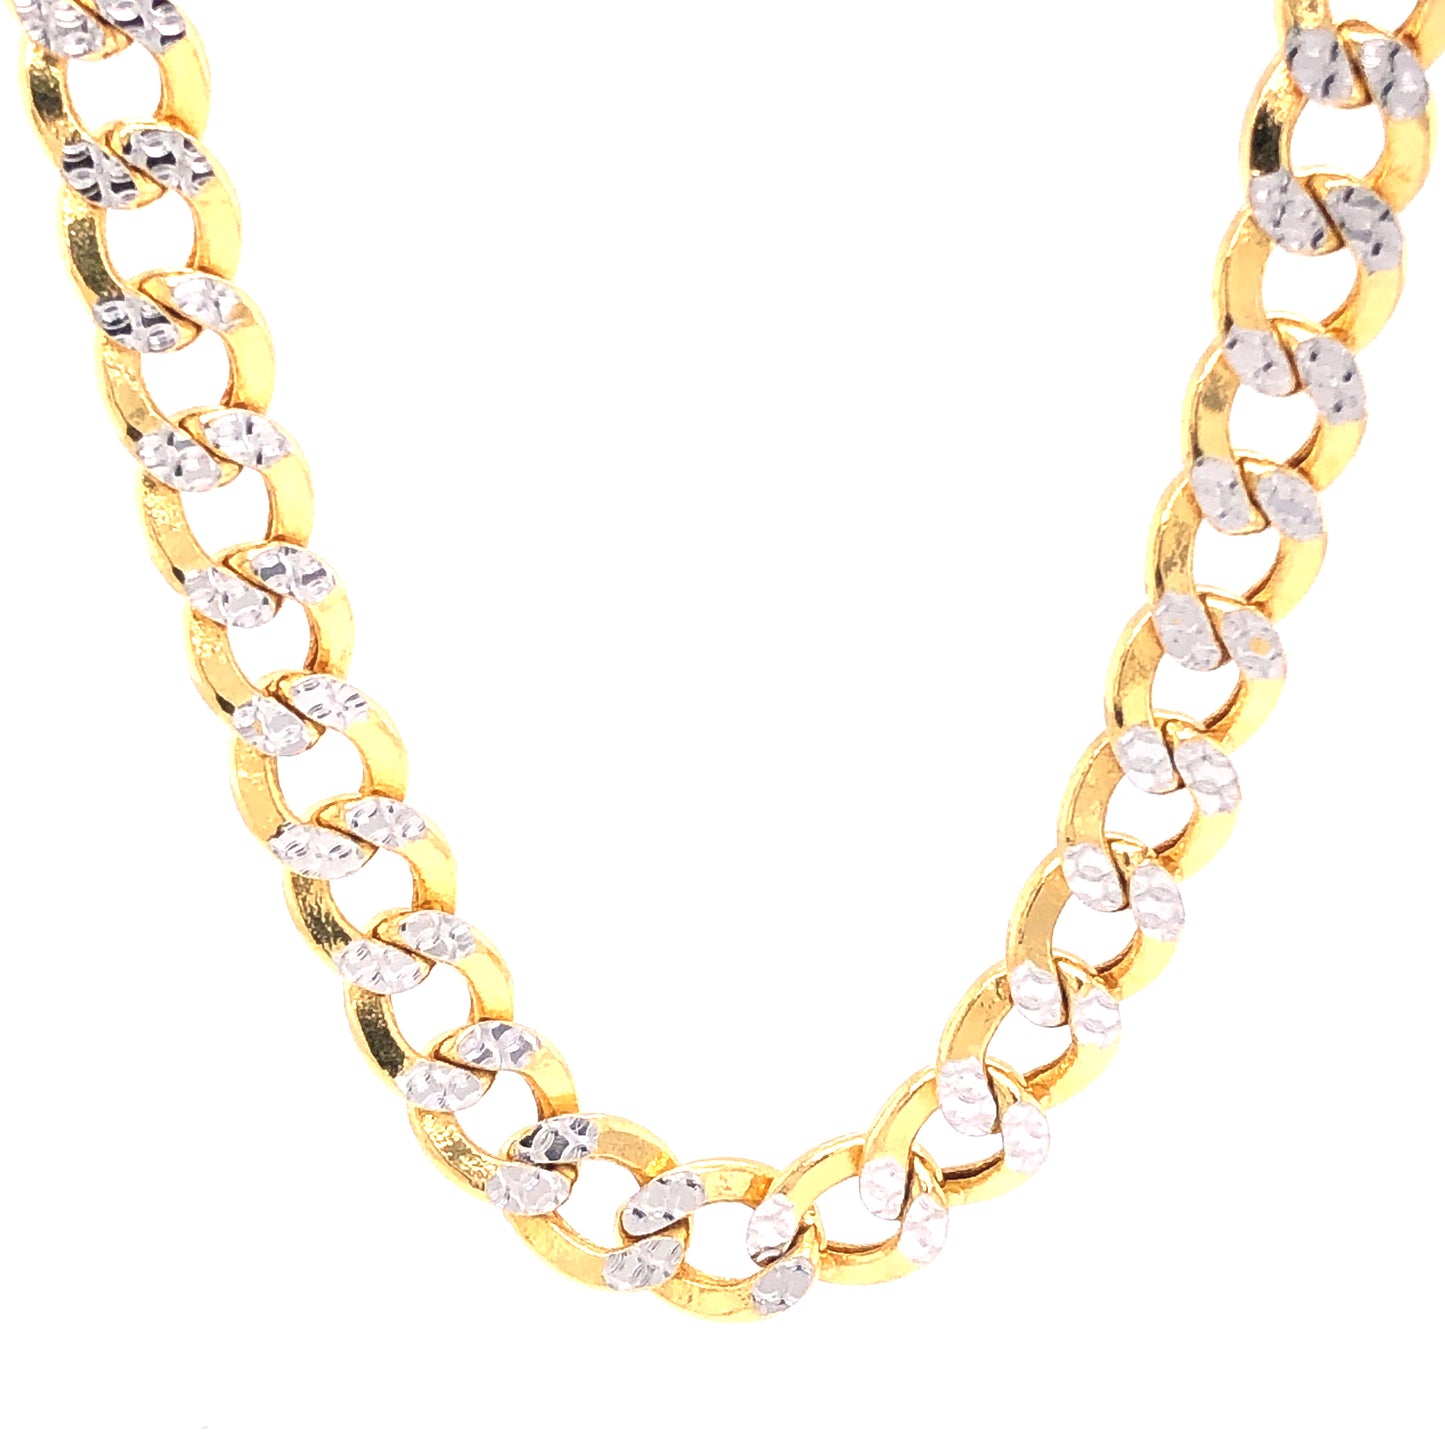 14K Cuban Link Two-Tone Gold Chain | Luby Gold Collection | Luby 